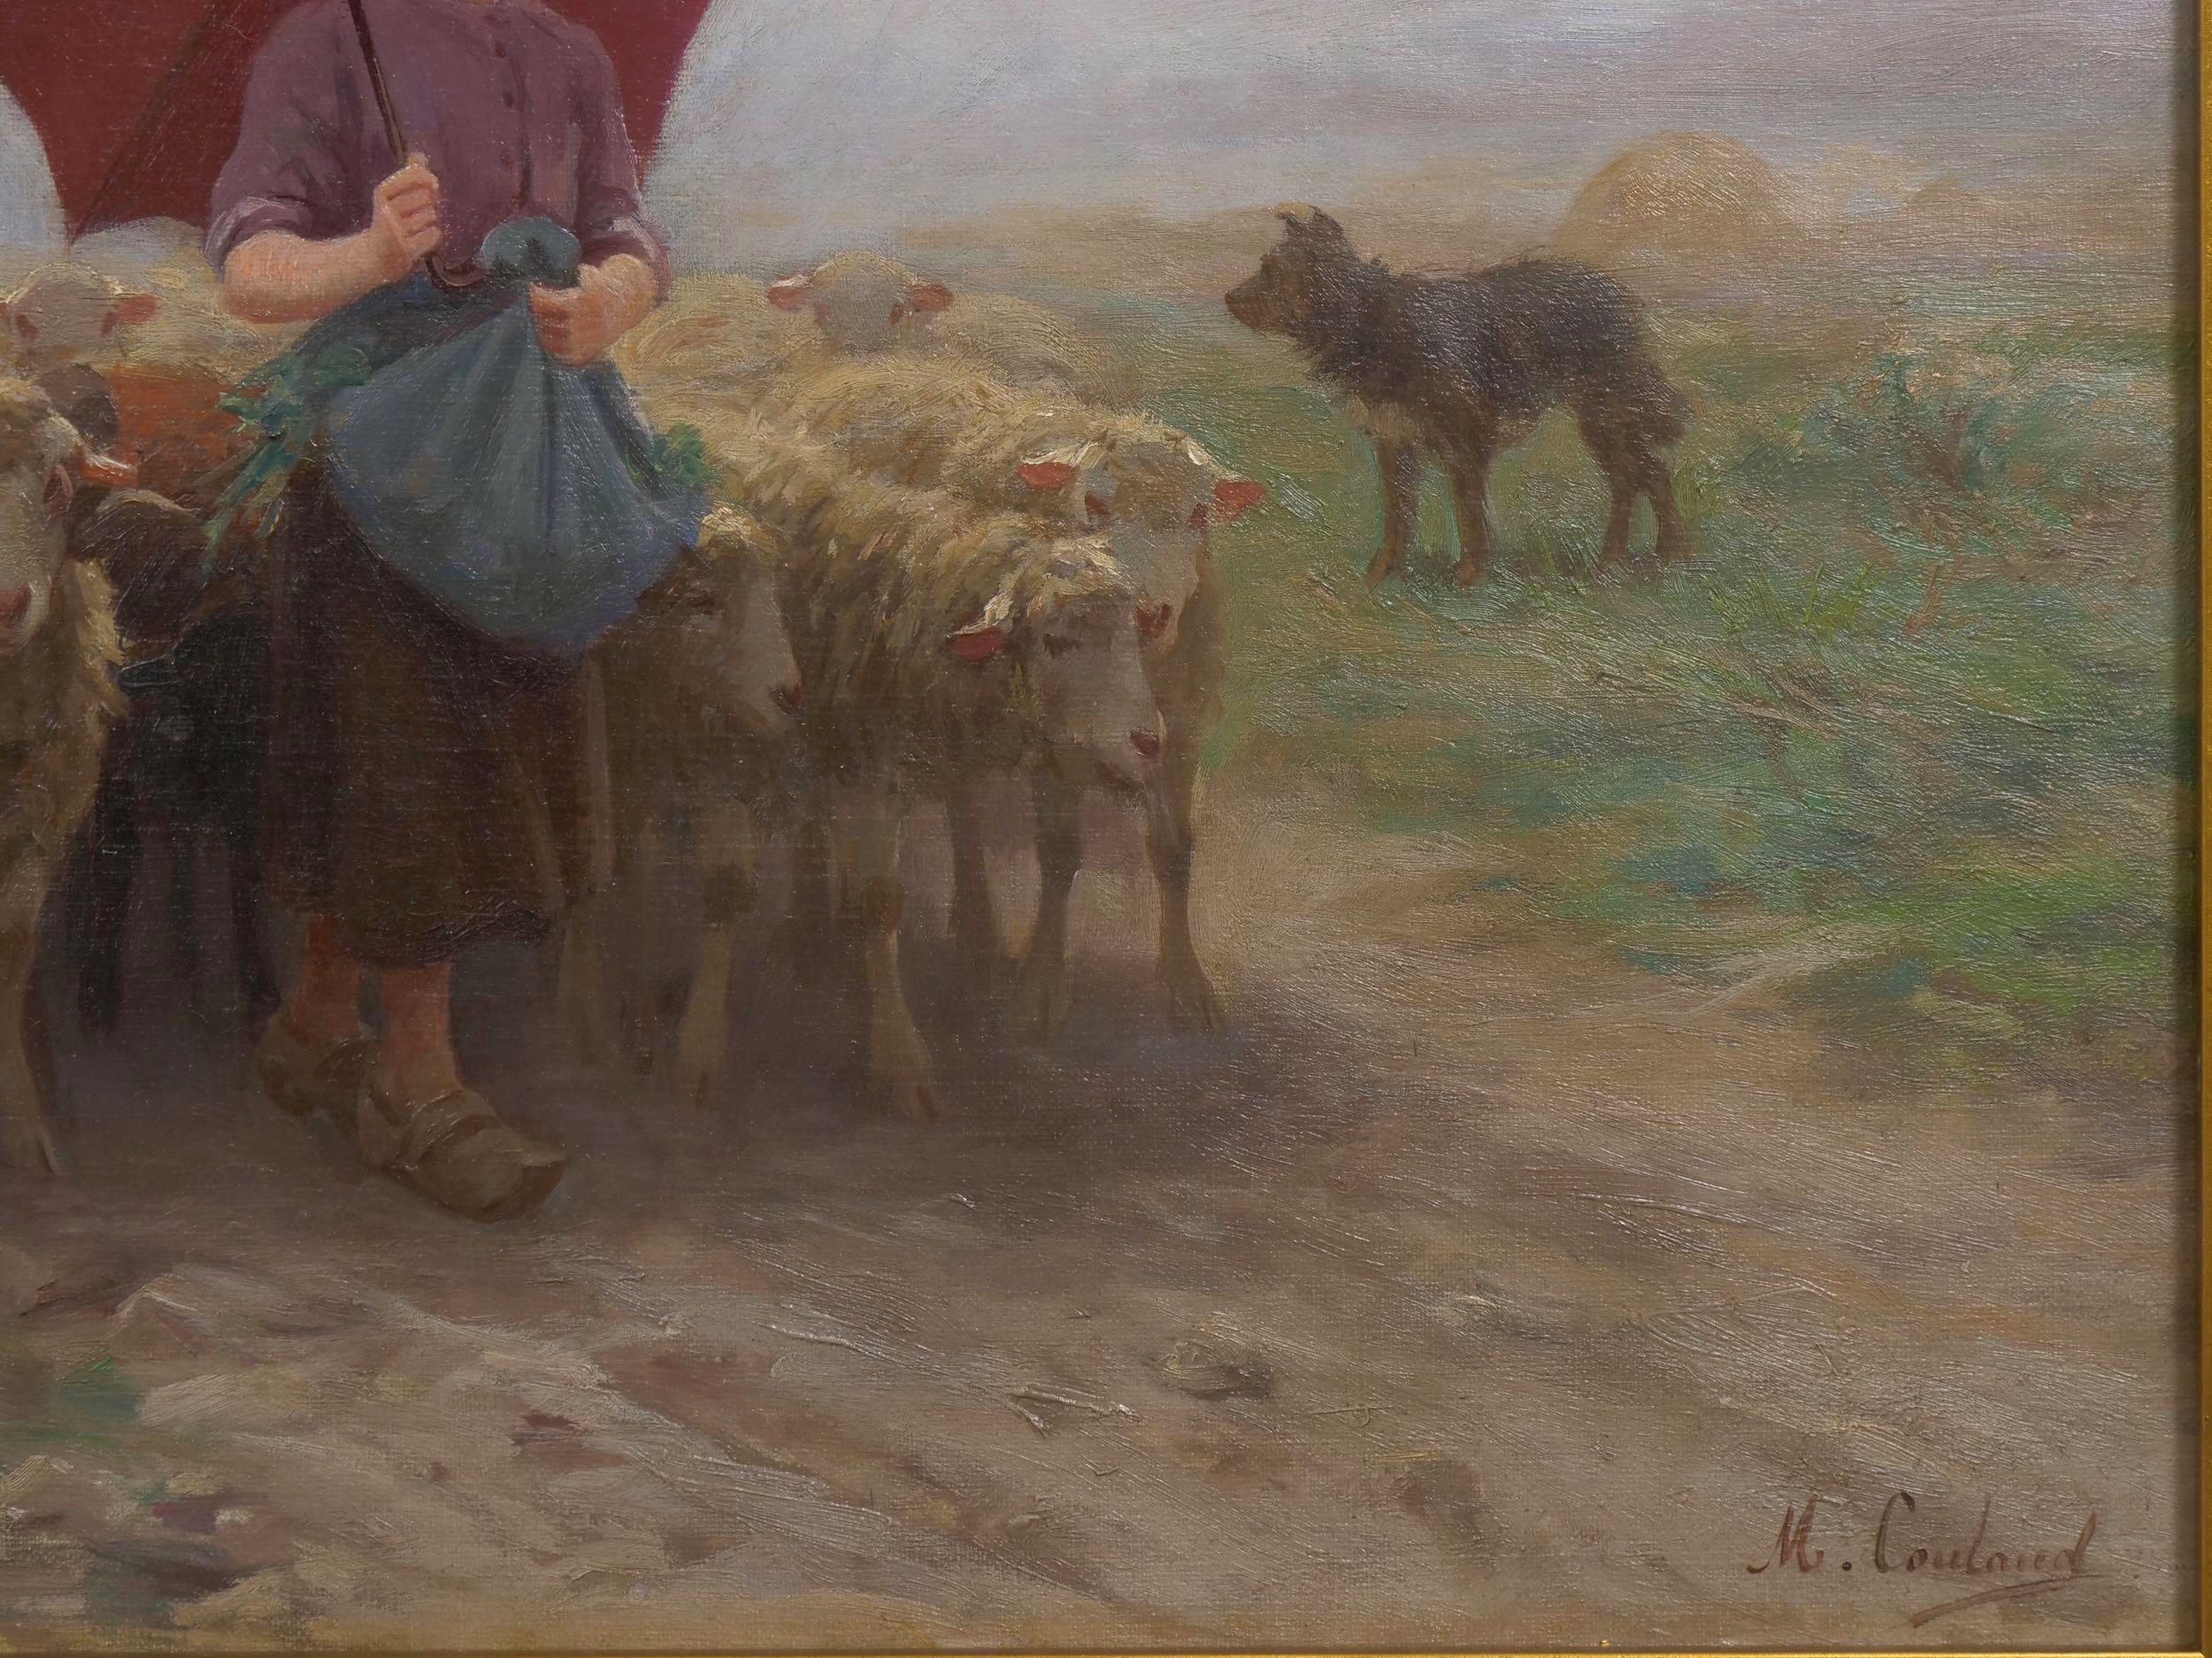 19th Century “Leading Her Flock” French Antique Barbizon Landscape Painting by Martin Coulaud